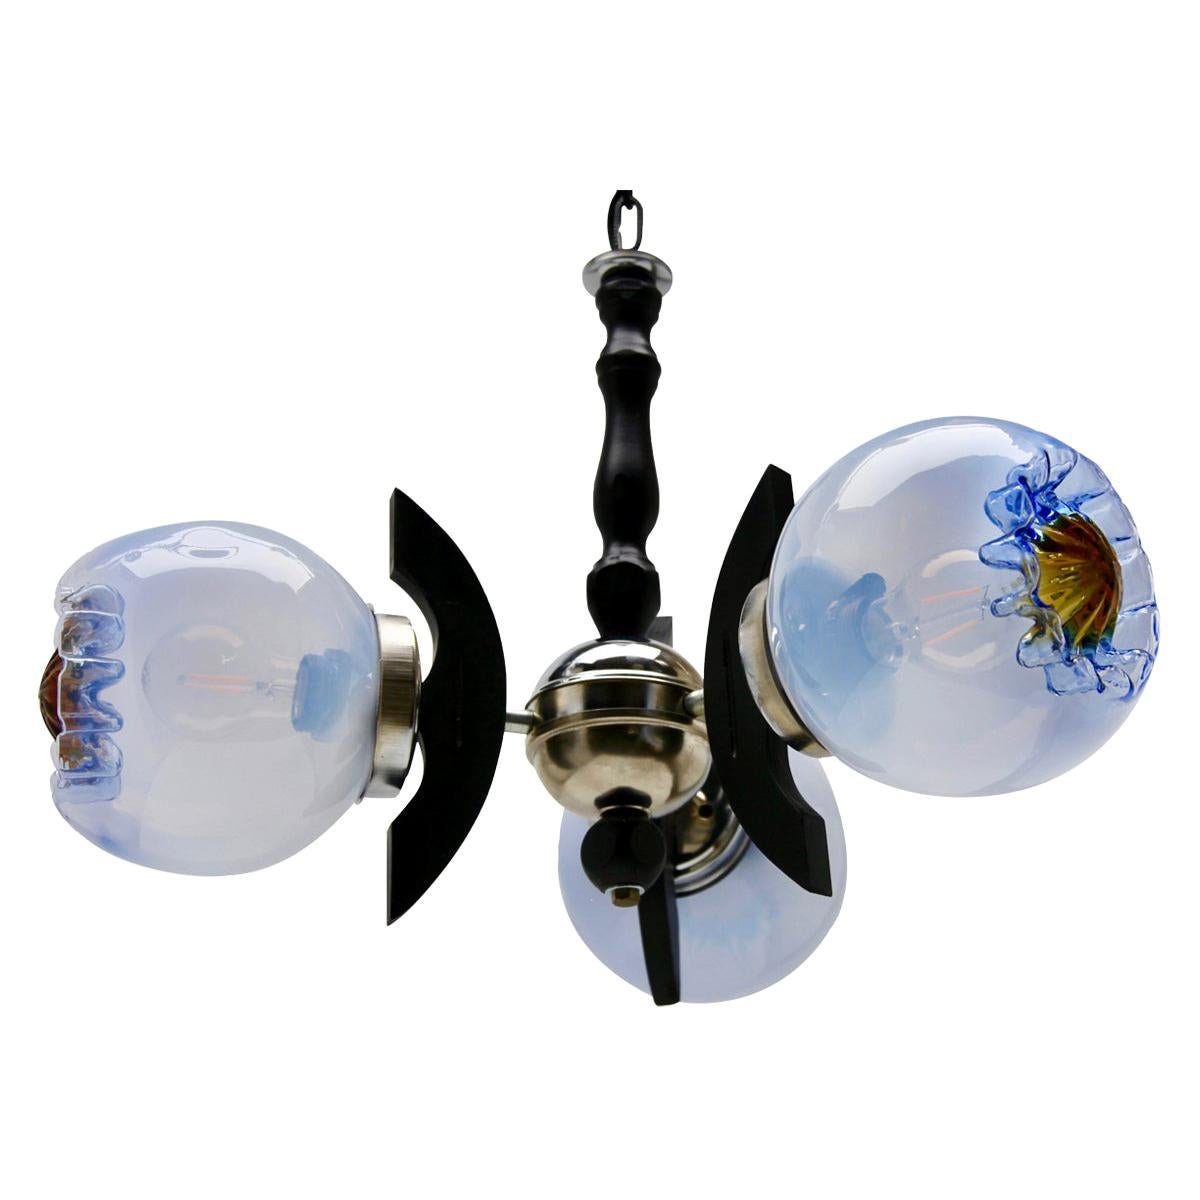 Pendant by Mazzega with 3 Globes of Clear Glass with Orange and Bleu Inclusions